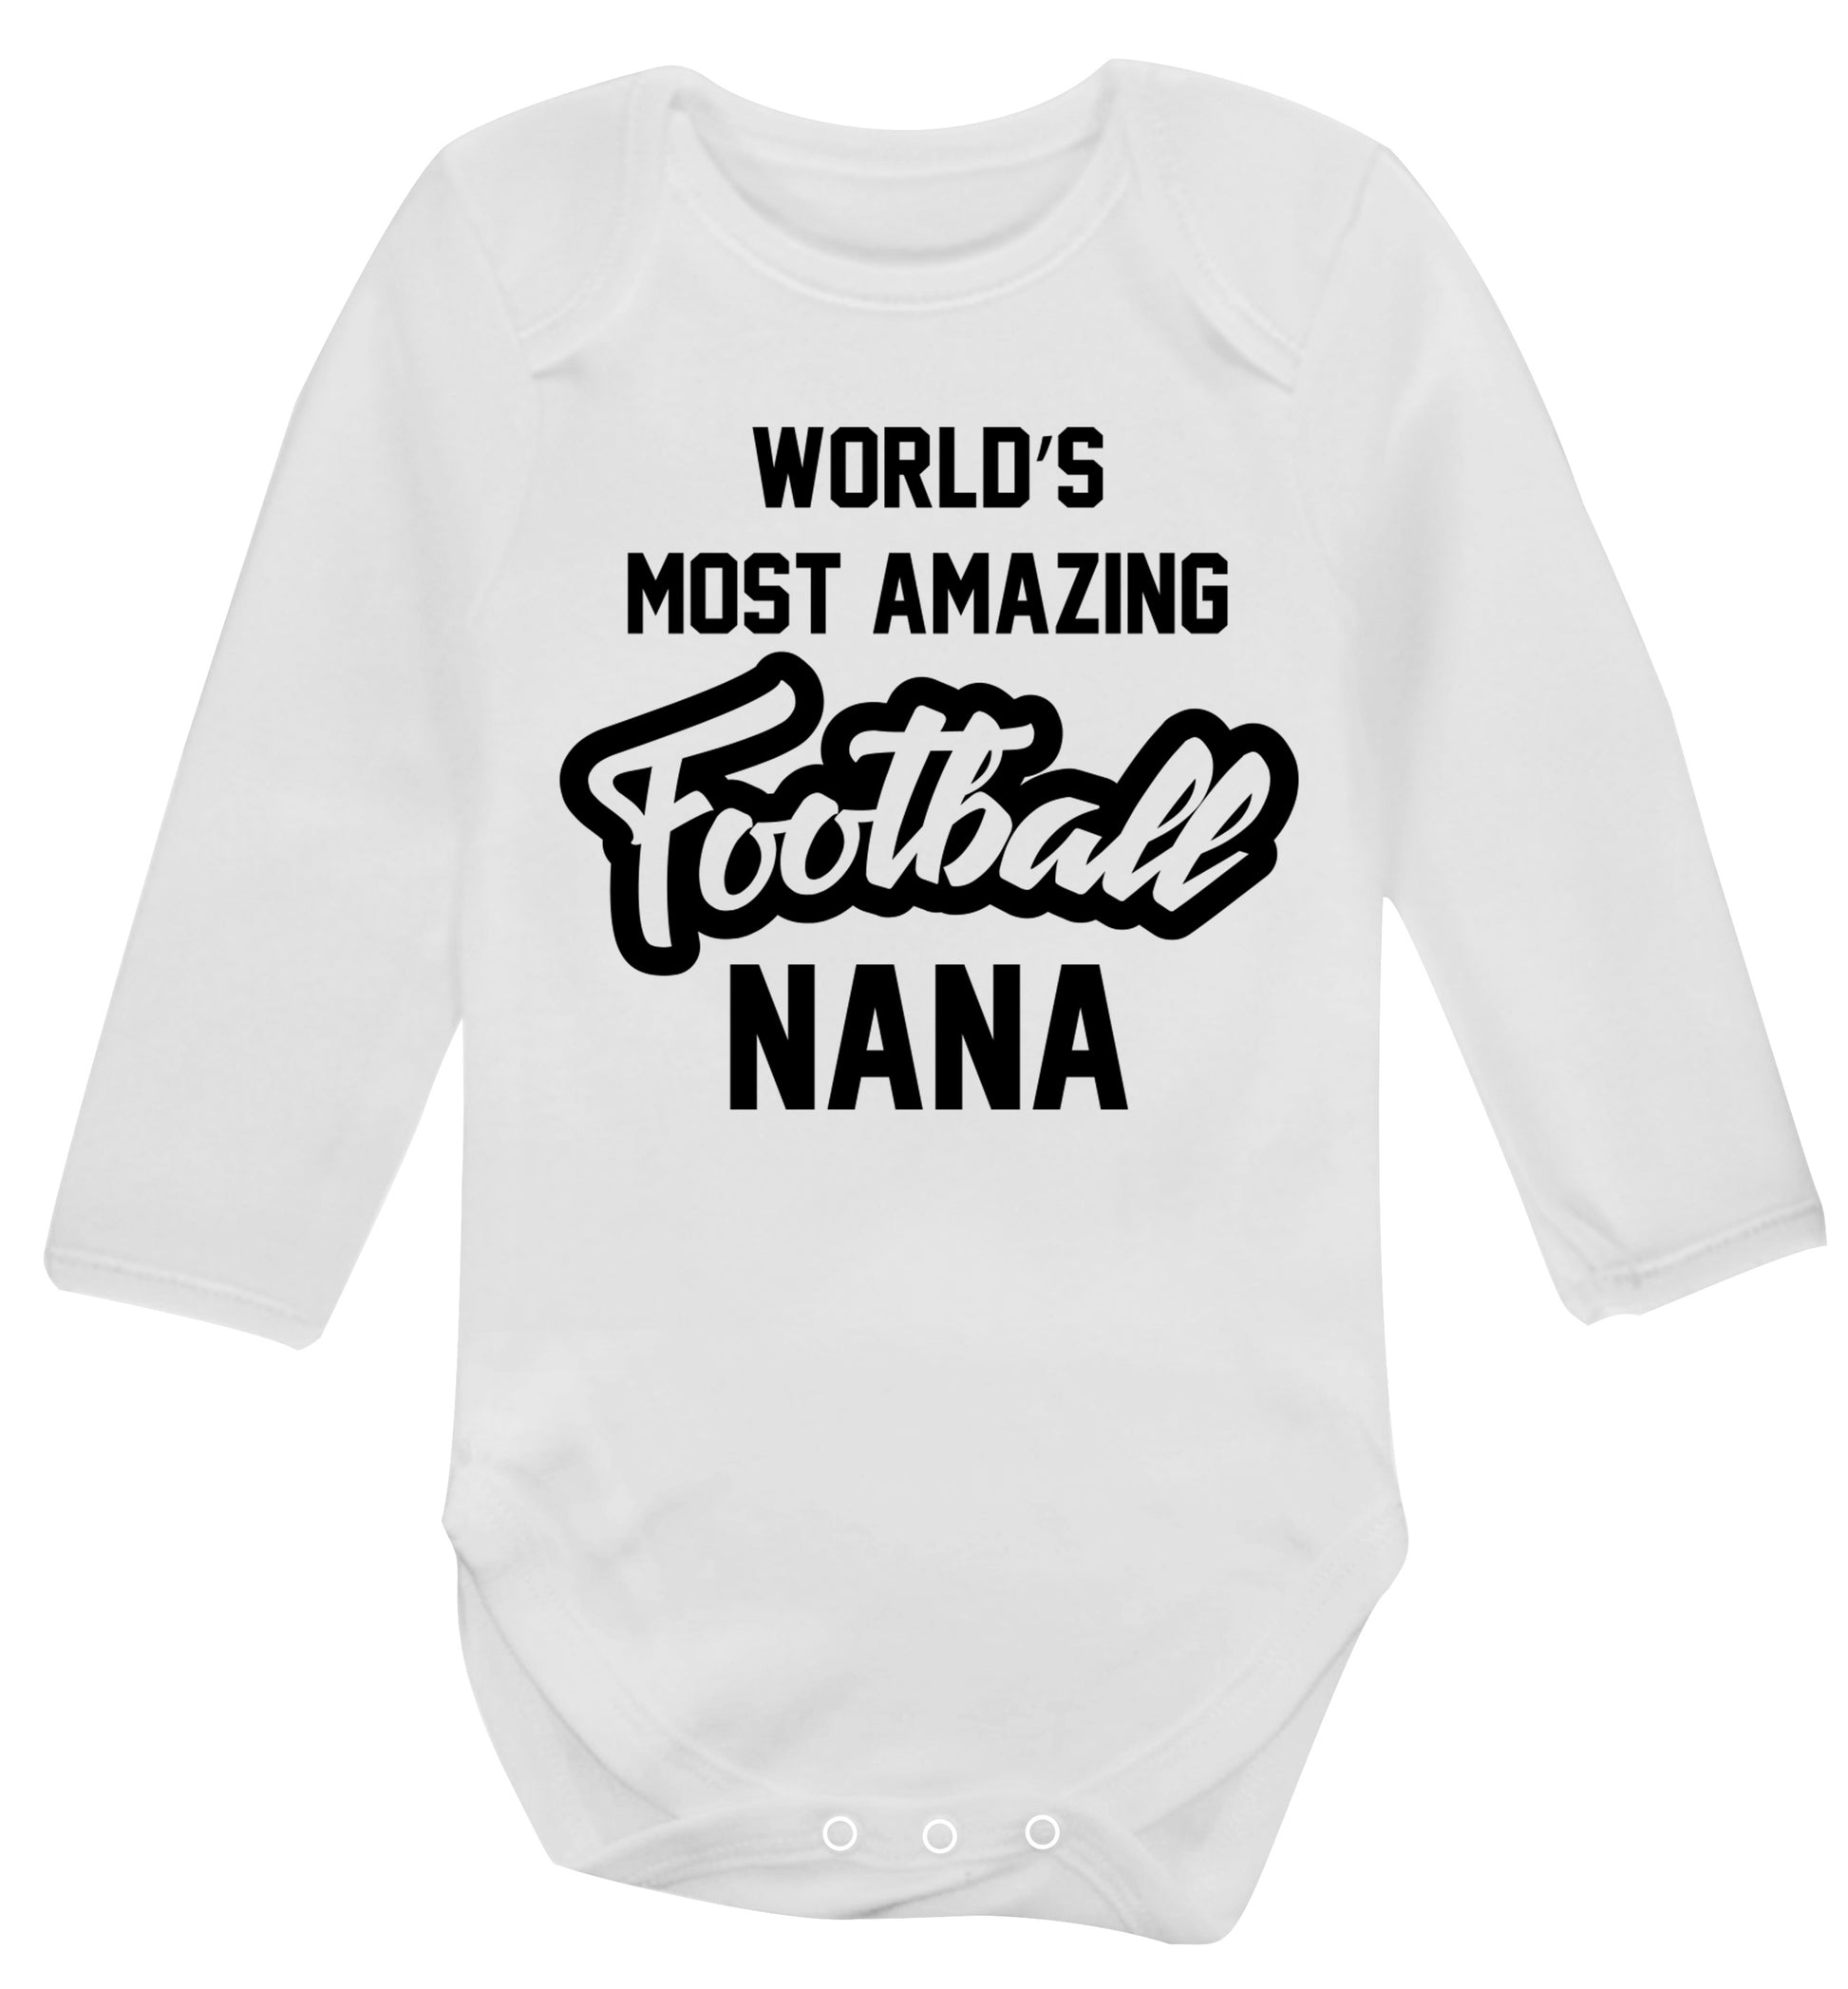 Worlds most amazing football nana Baby Vest long sleeved white 6-12 months